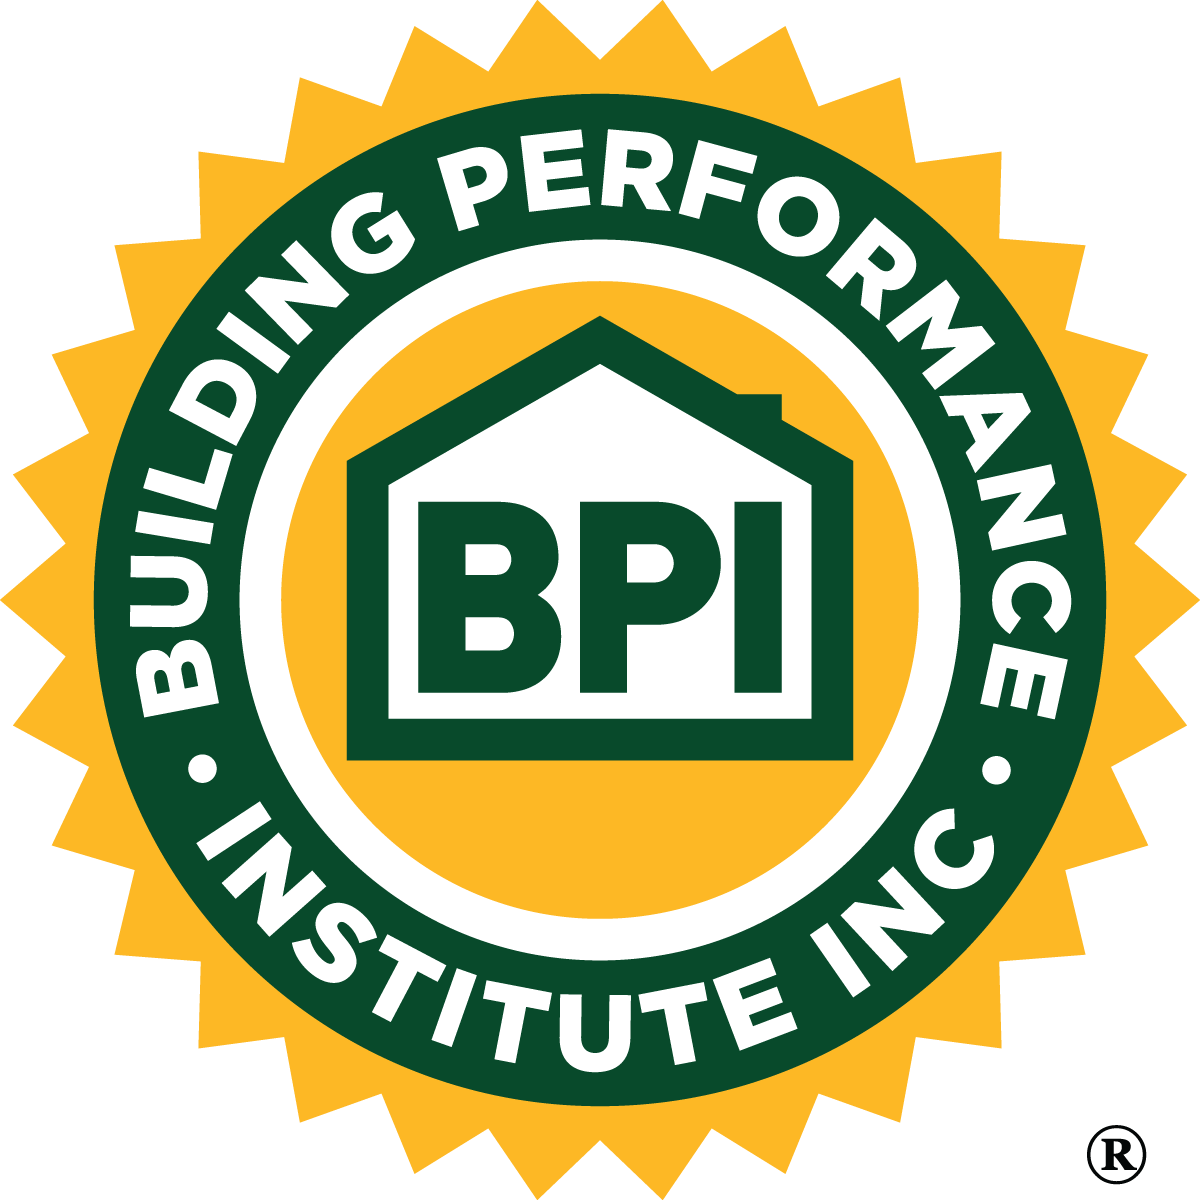 Appliance & Air Care Experts belongs to the Building Performance Institute.